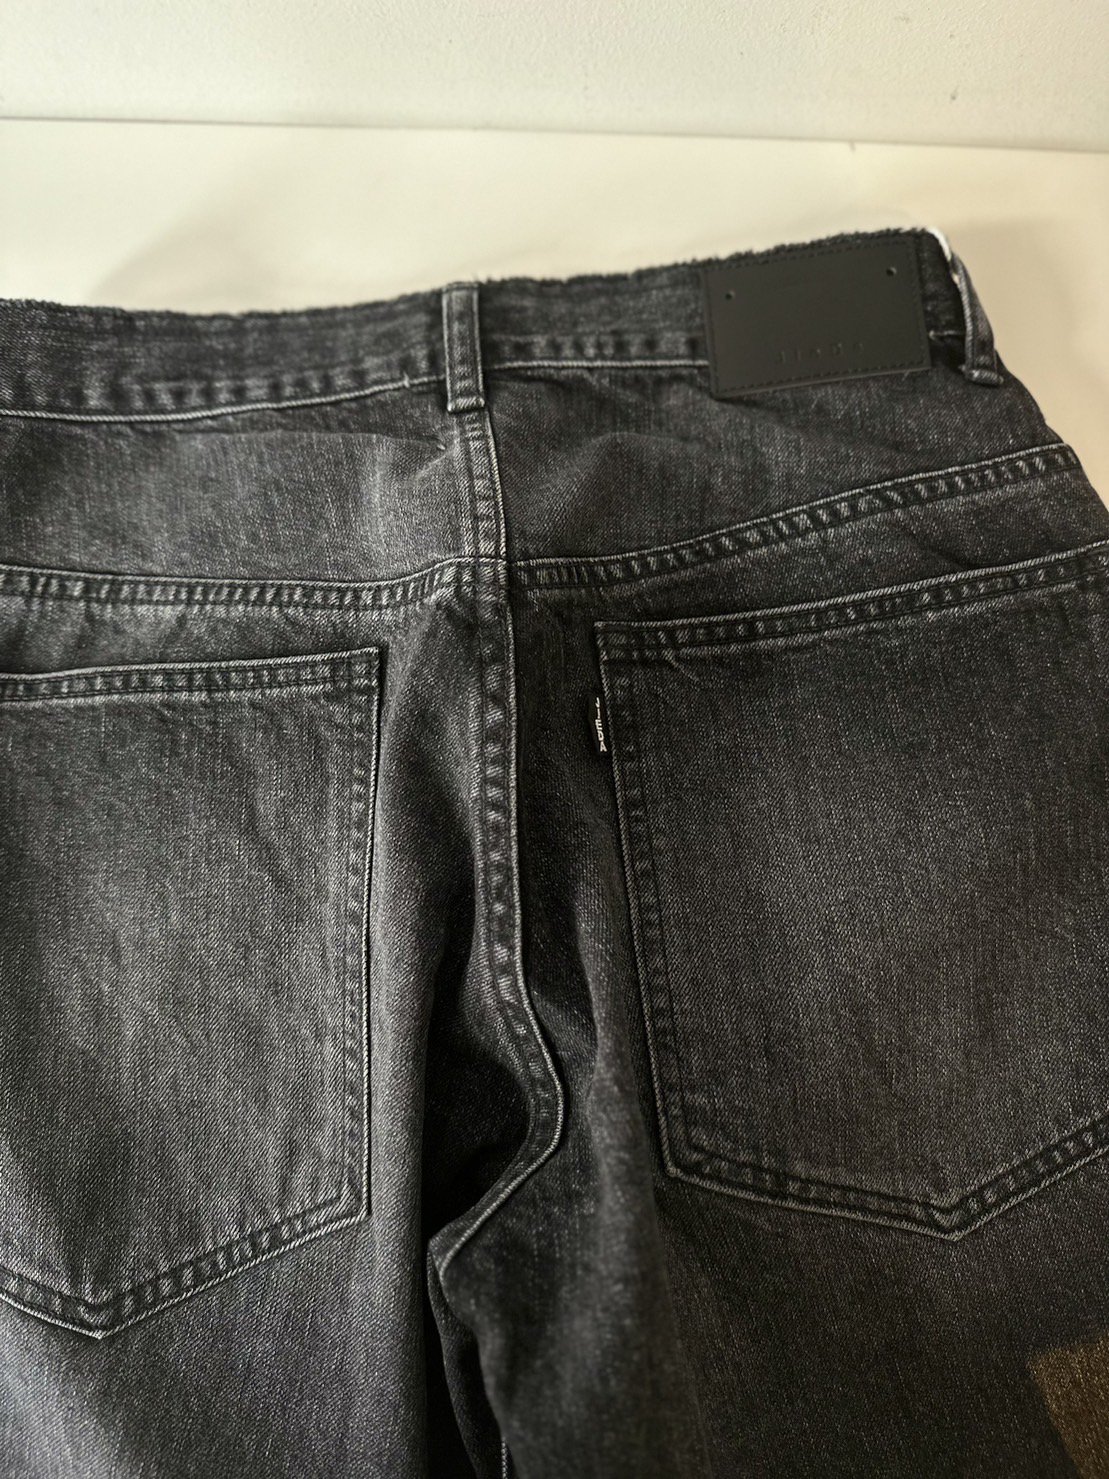 JieDa<br />USED 3D BAGGY DENIM / BLACK<img class='new_mark_img2' src='https://img.shop-pro.jp/img/new/icons47.gif' style='border:none;display:inline;margin:0px;padding:0px;width:auto;' />